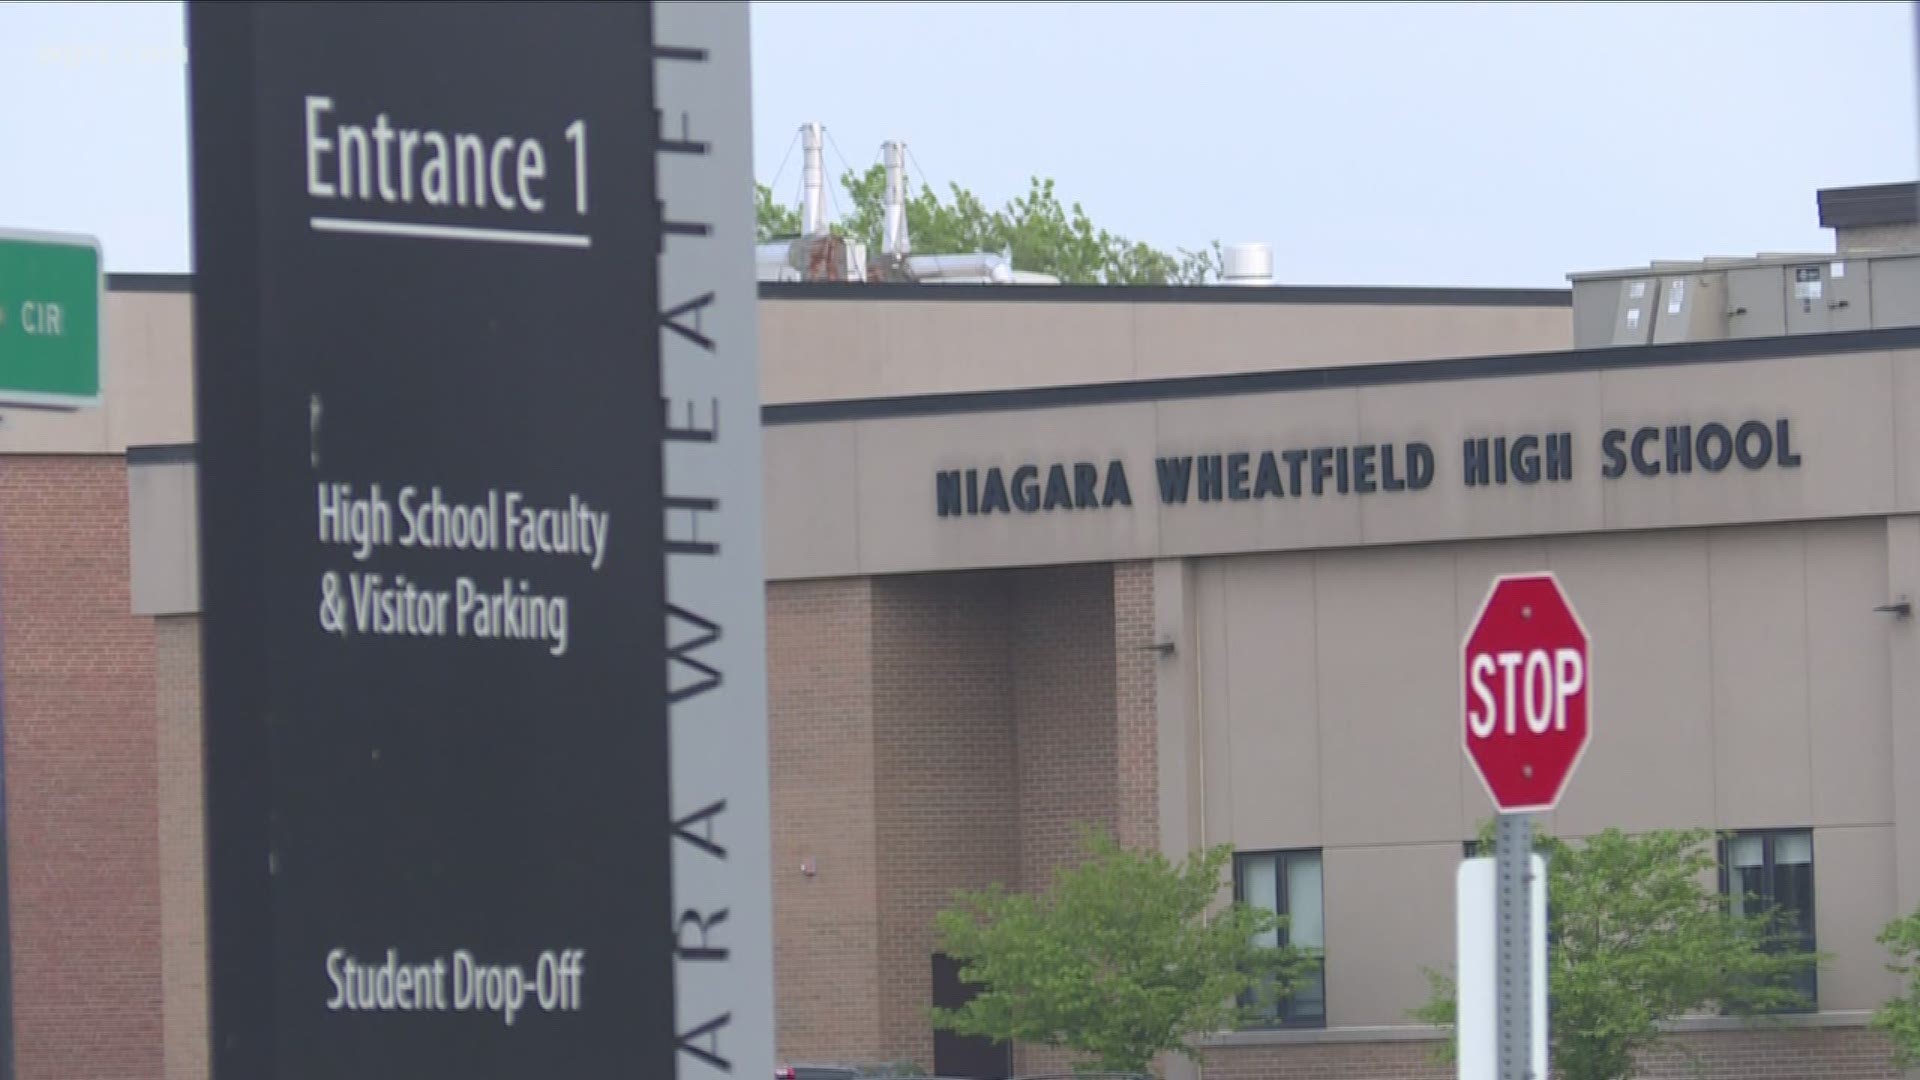 Niagara wheatfield High school is dealing with controversy. The Superintendent is responding to a rape case involving two high school students.